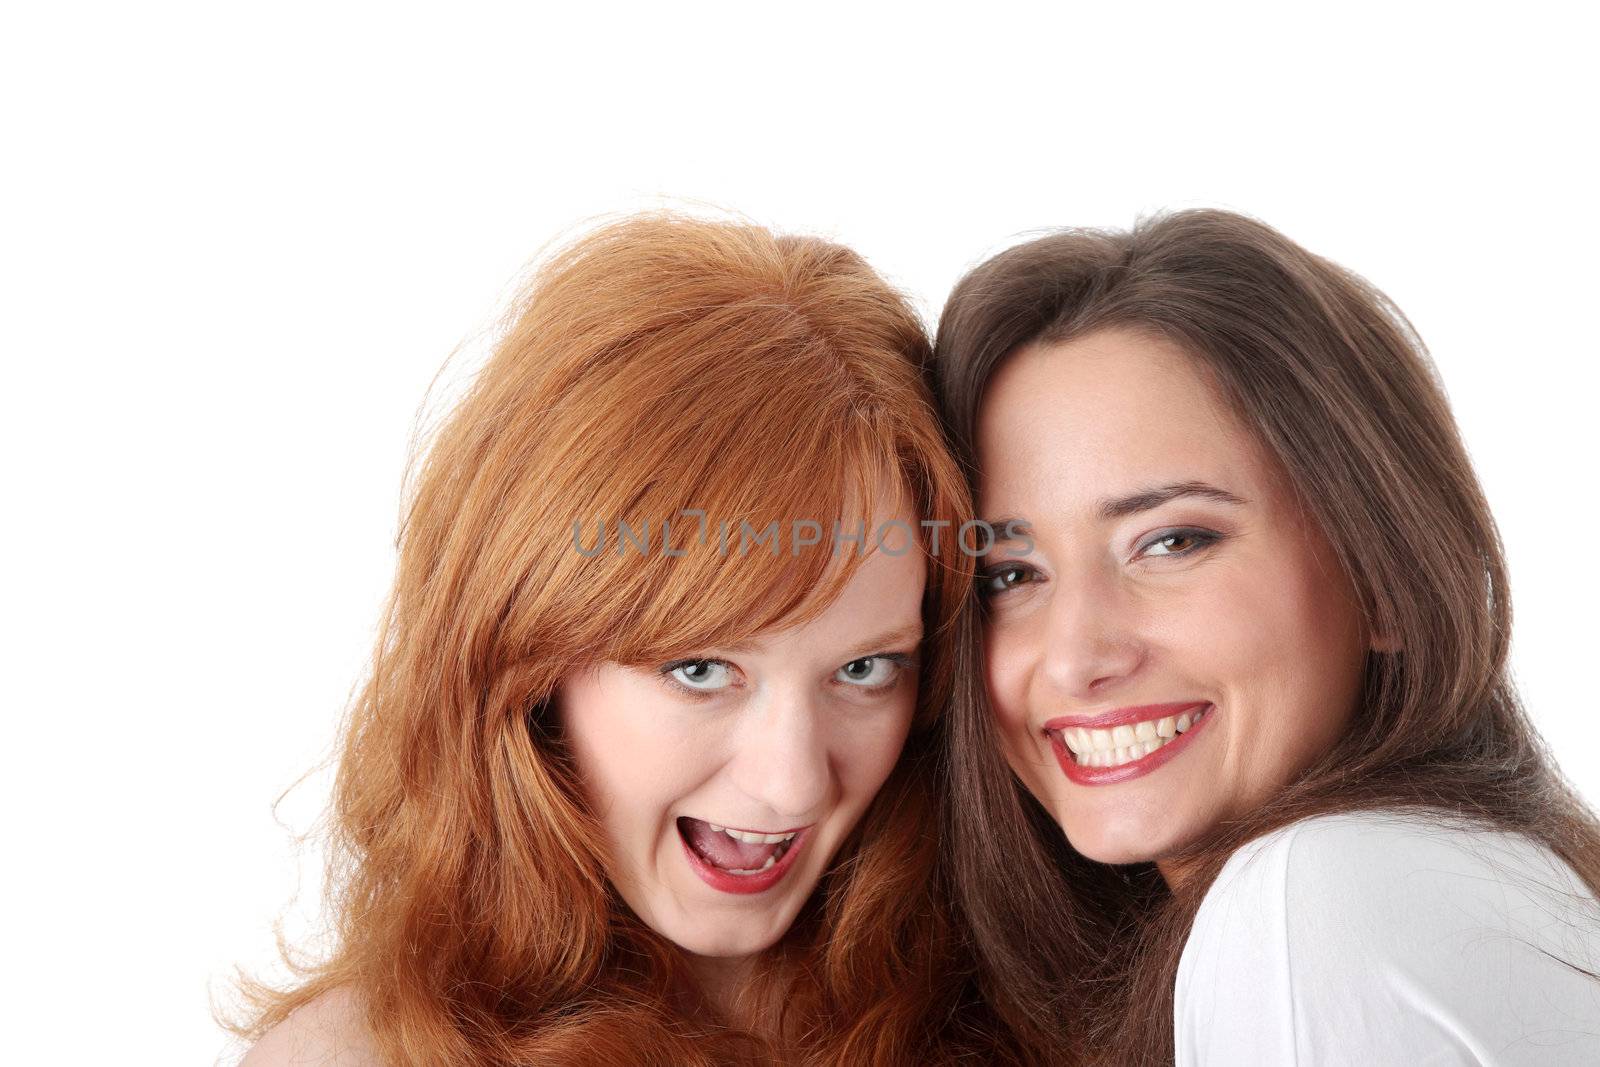 Two party girls, isolated on white background